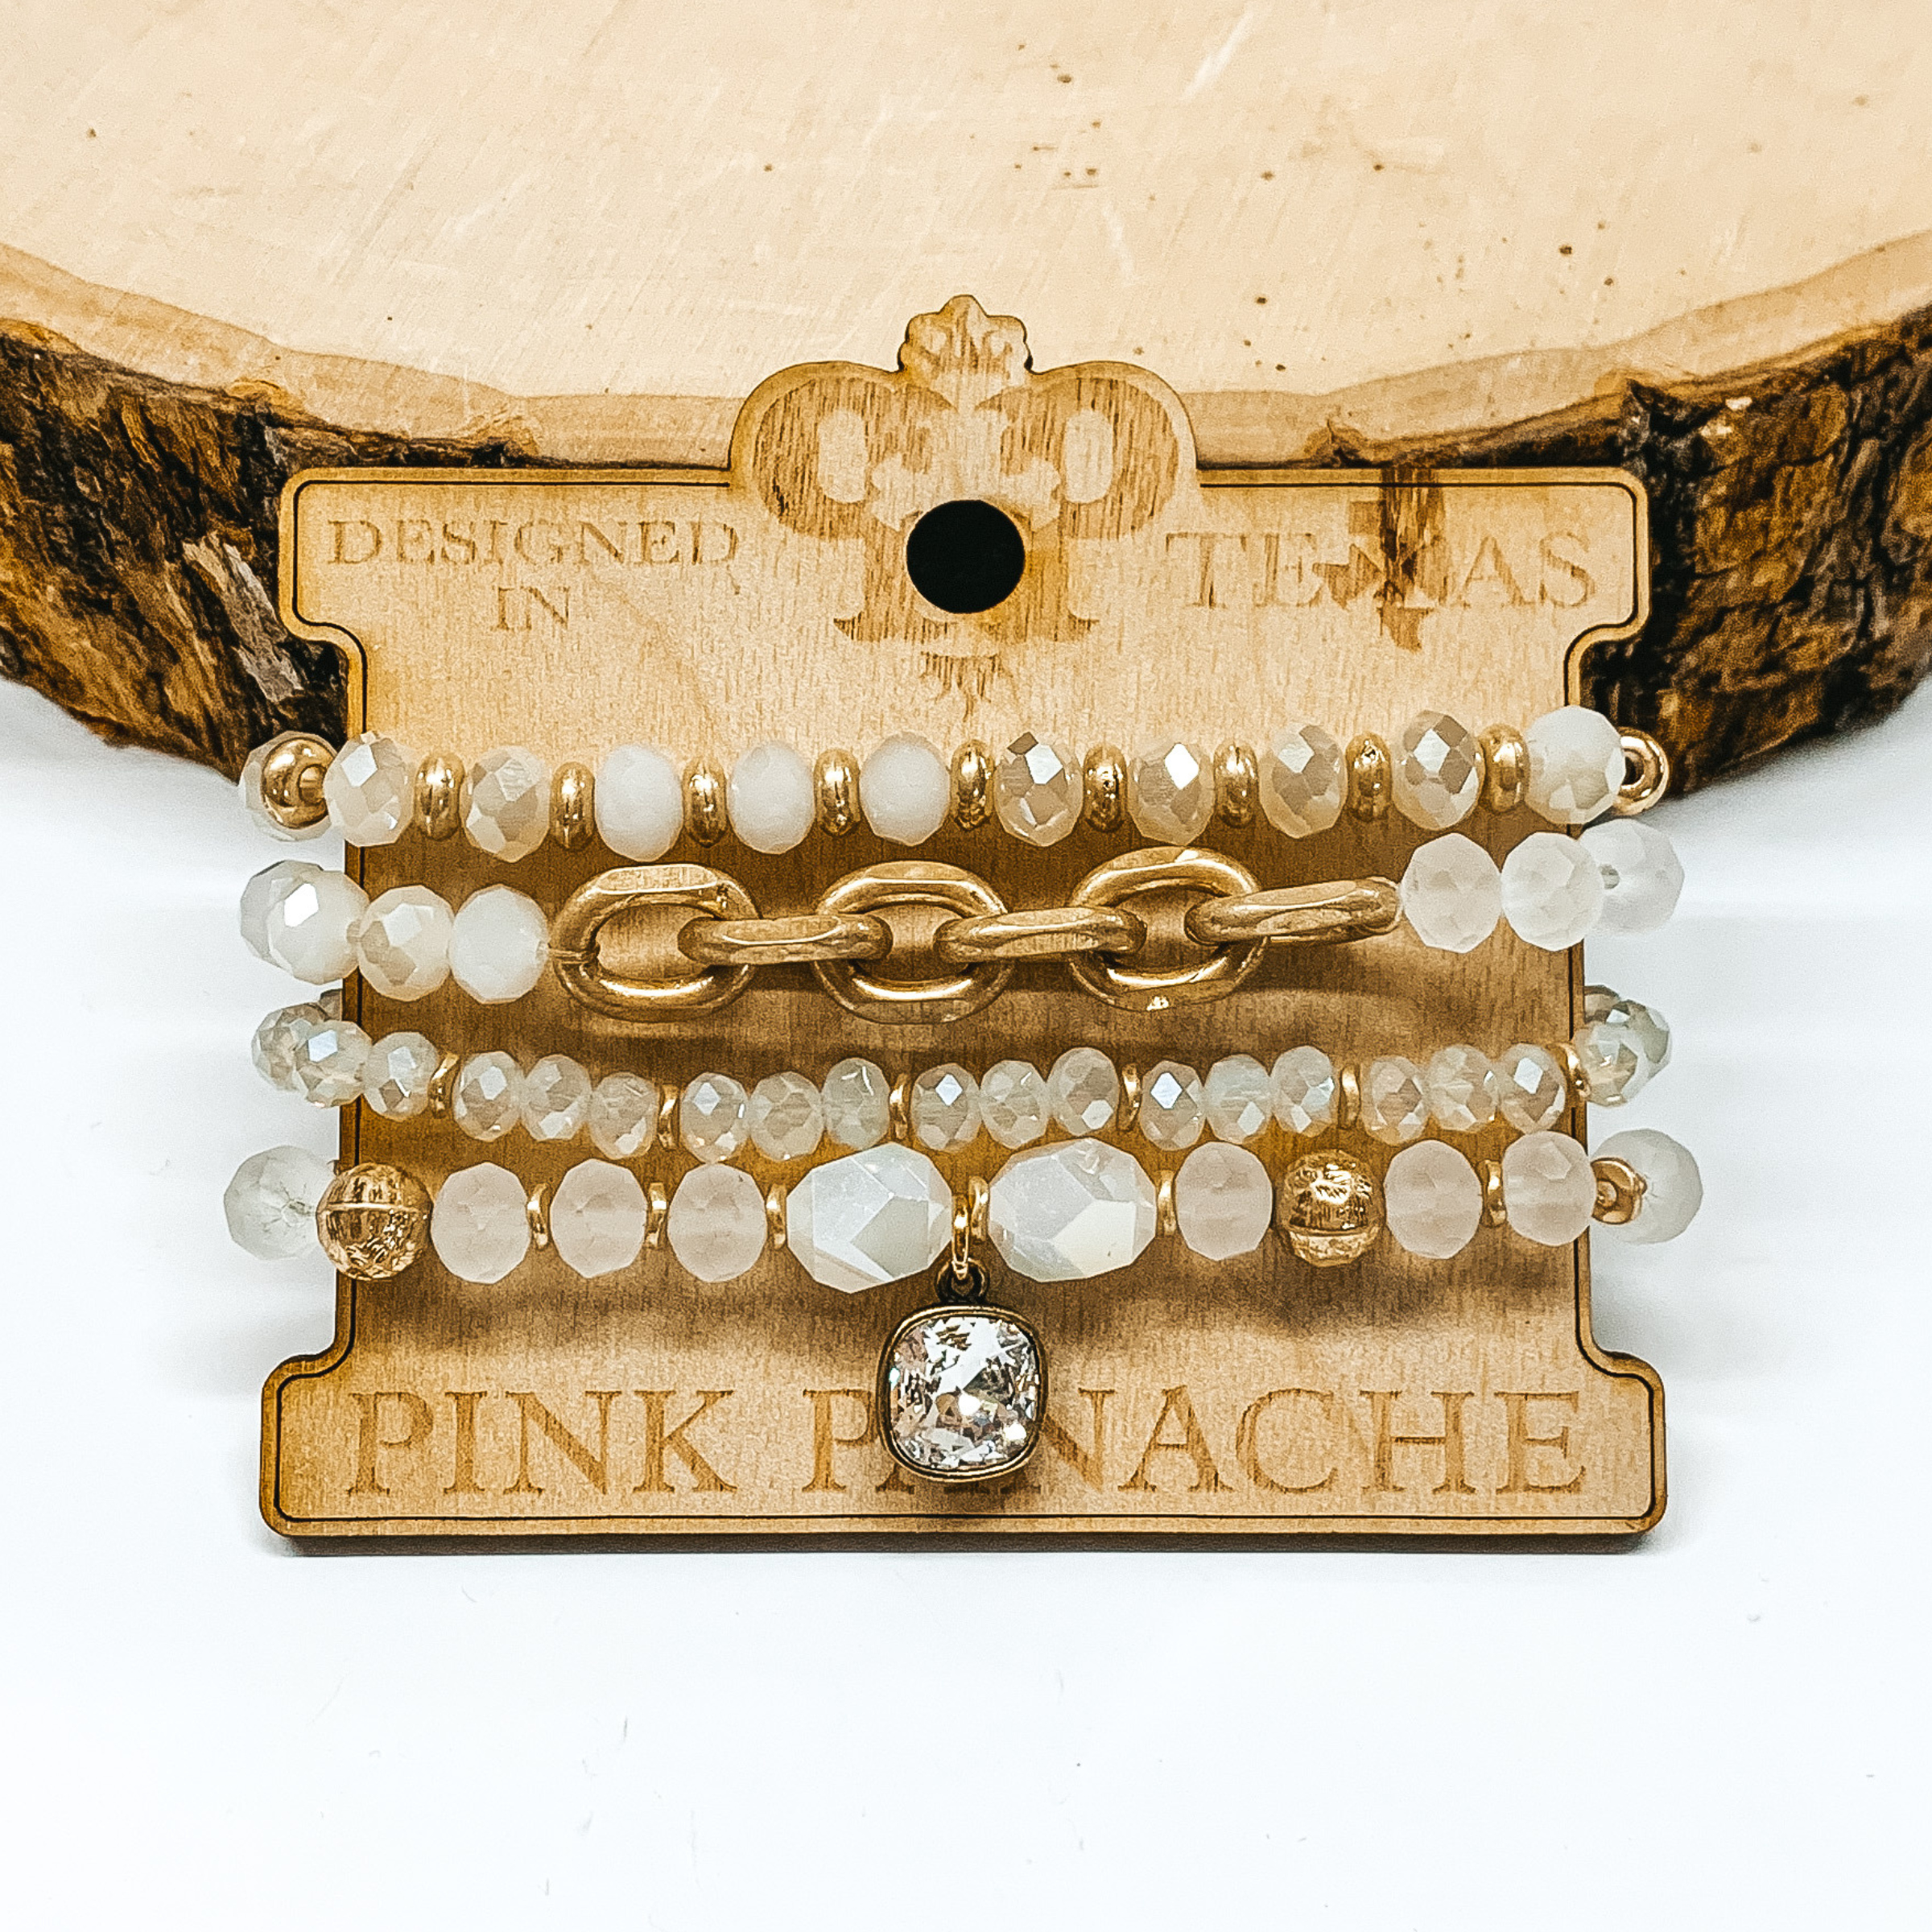 Pink Panache | White Crystal and Gold Tone Beaded Bracelet Set with Gold Tone Chain Segment and Clear Cushion Cut Crystal Pendant - Giddy Up Glamour Boutique